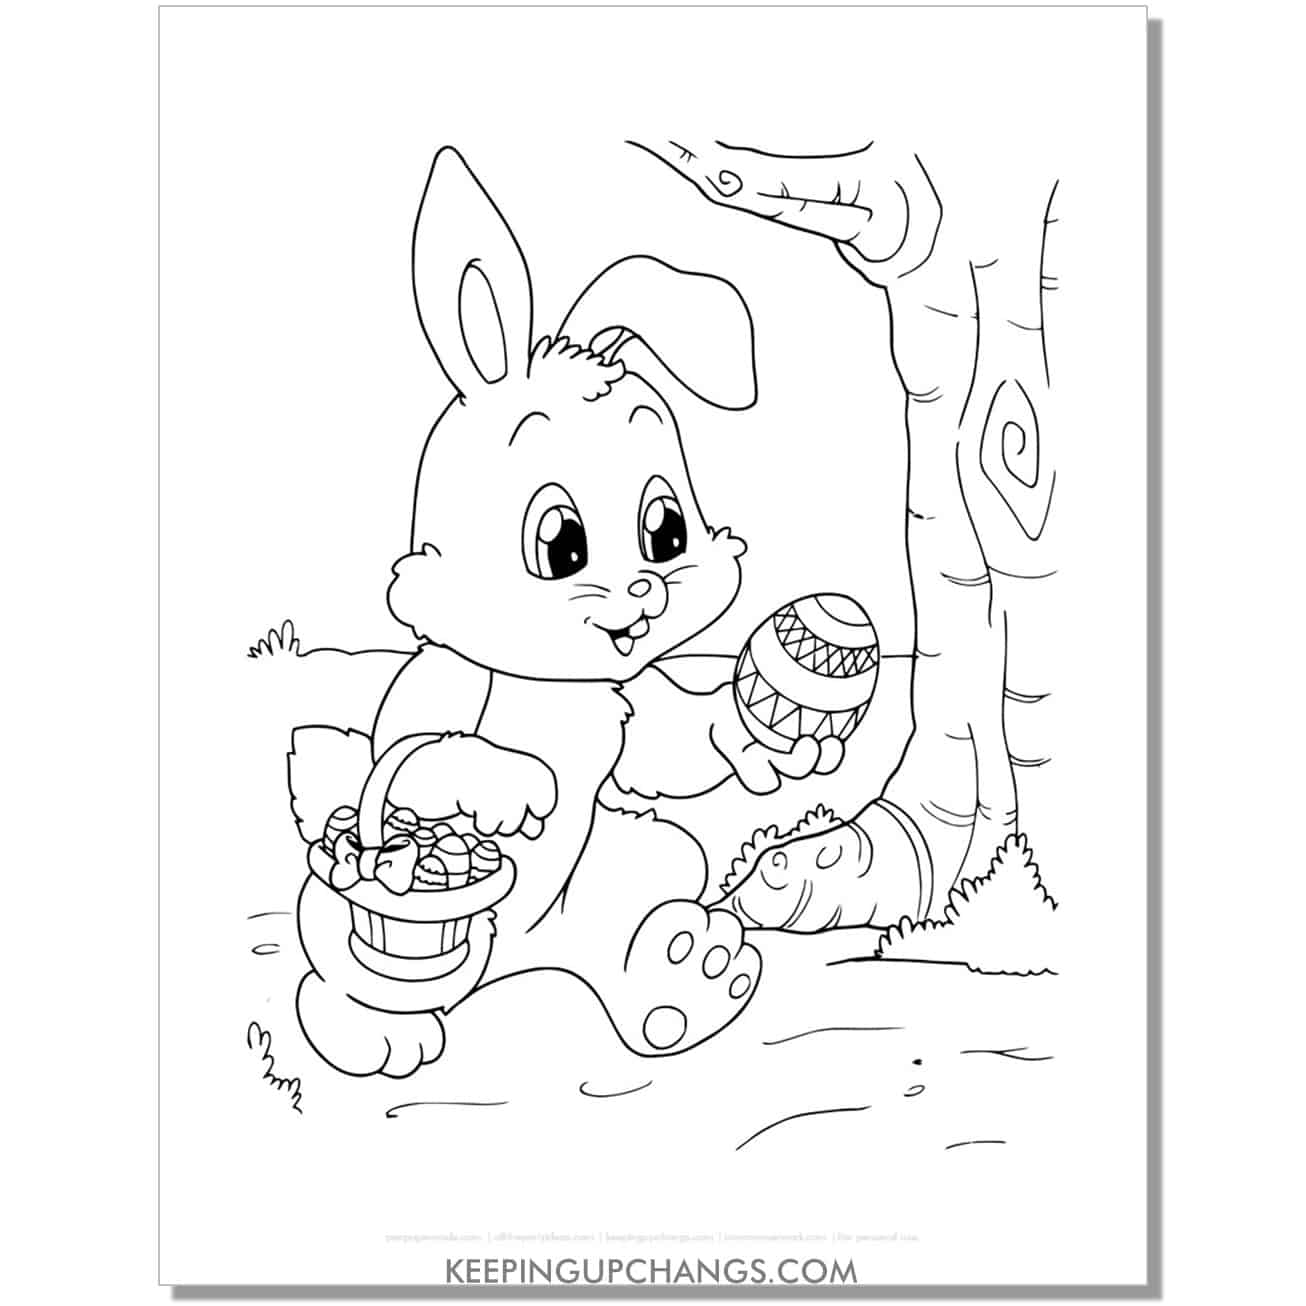 cute easter bunny on egg hunt coloring page, sheet.